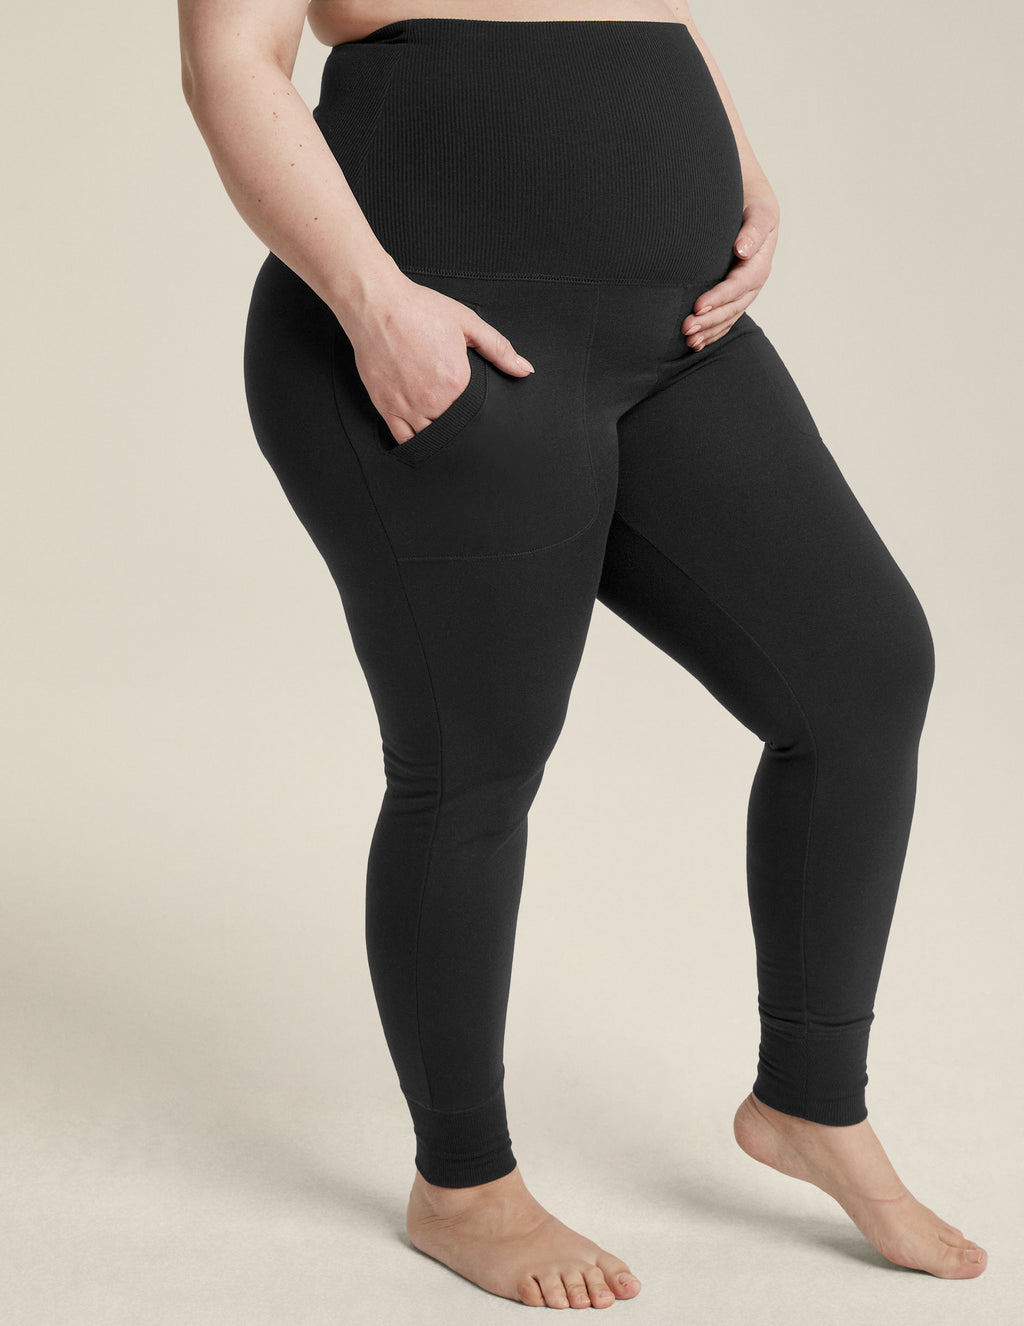  FULLSOFT Soft Maternity Workout Leggings with Pockets Over The  Belly Pregnancy Yoga Pants(Black,Small) : Clothing, Shoes & Jewelry